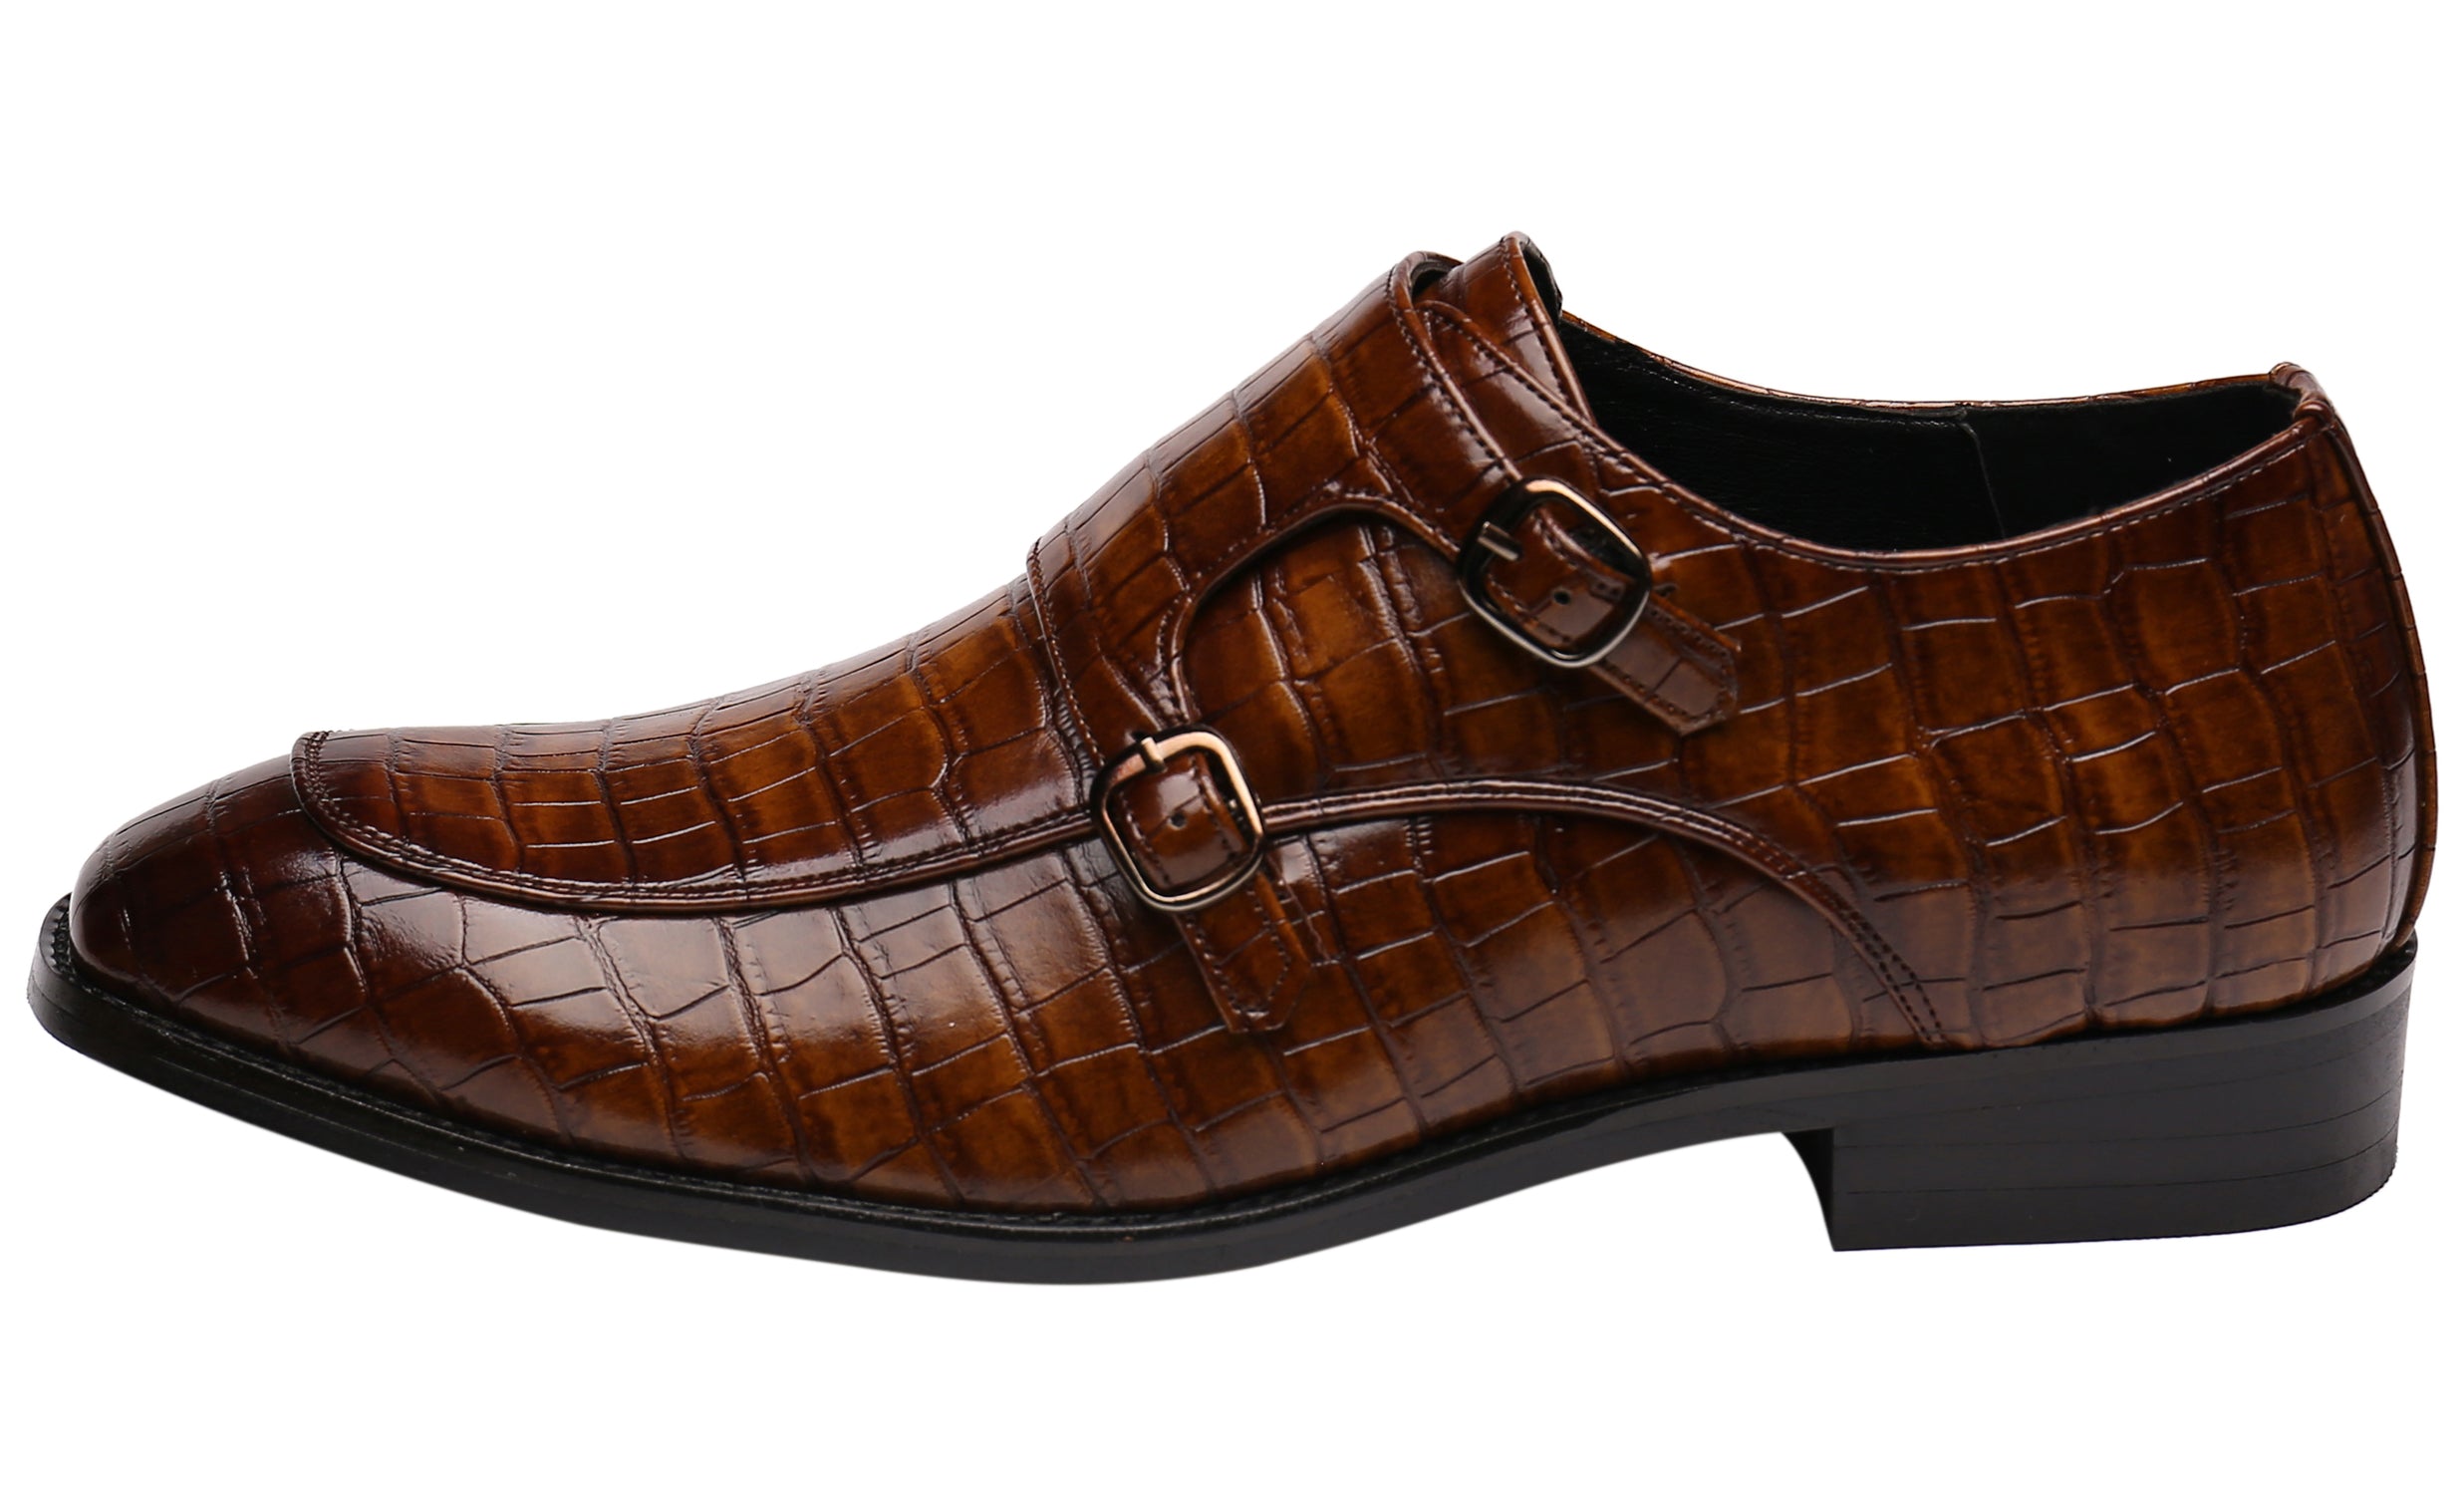 Men's Double Monk Strap Loafers